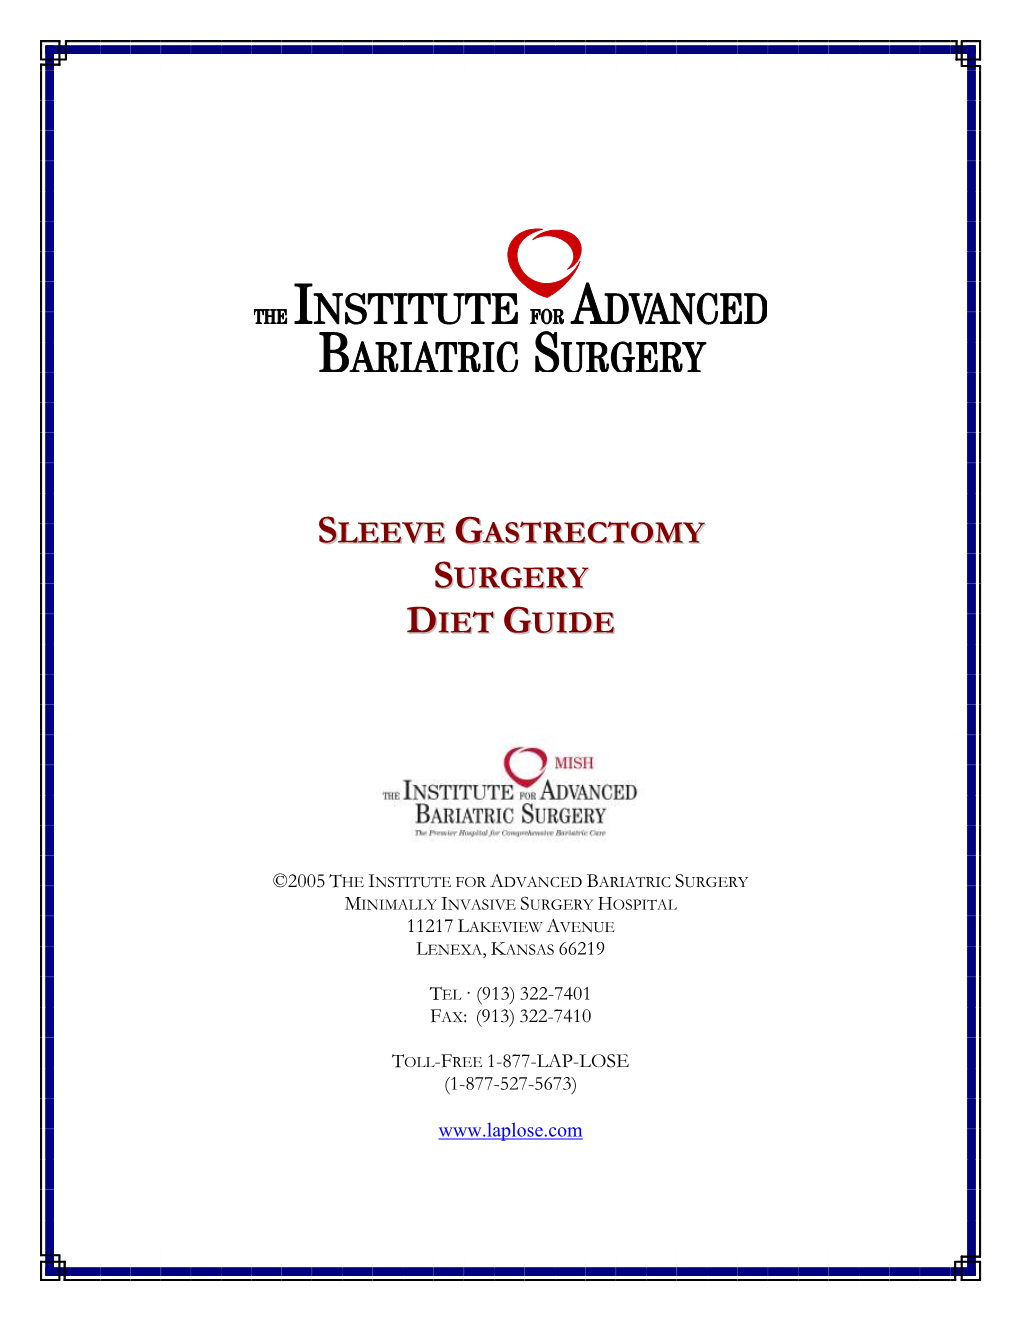 Sleeve Gastrectomy Surgery Diet Guide